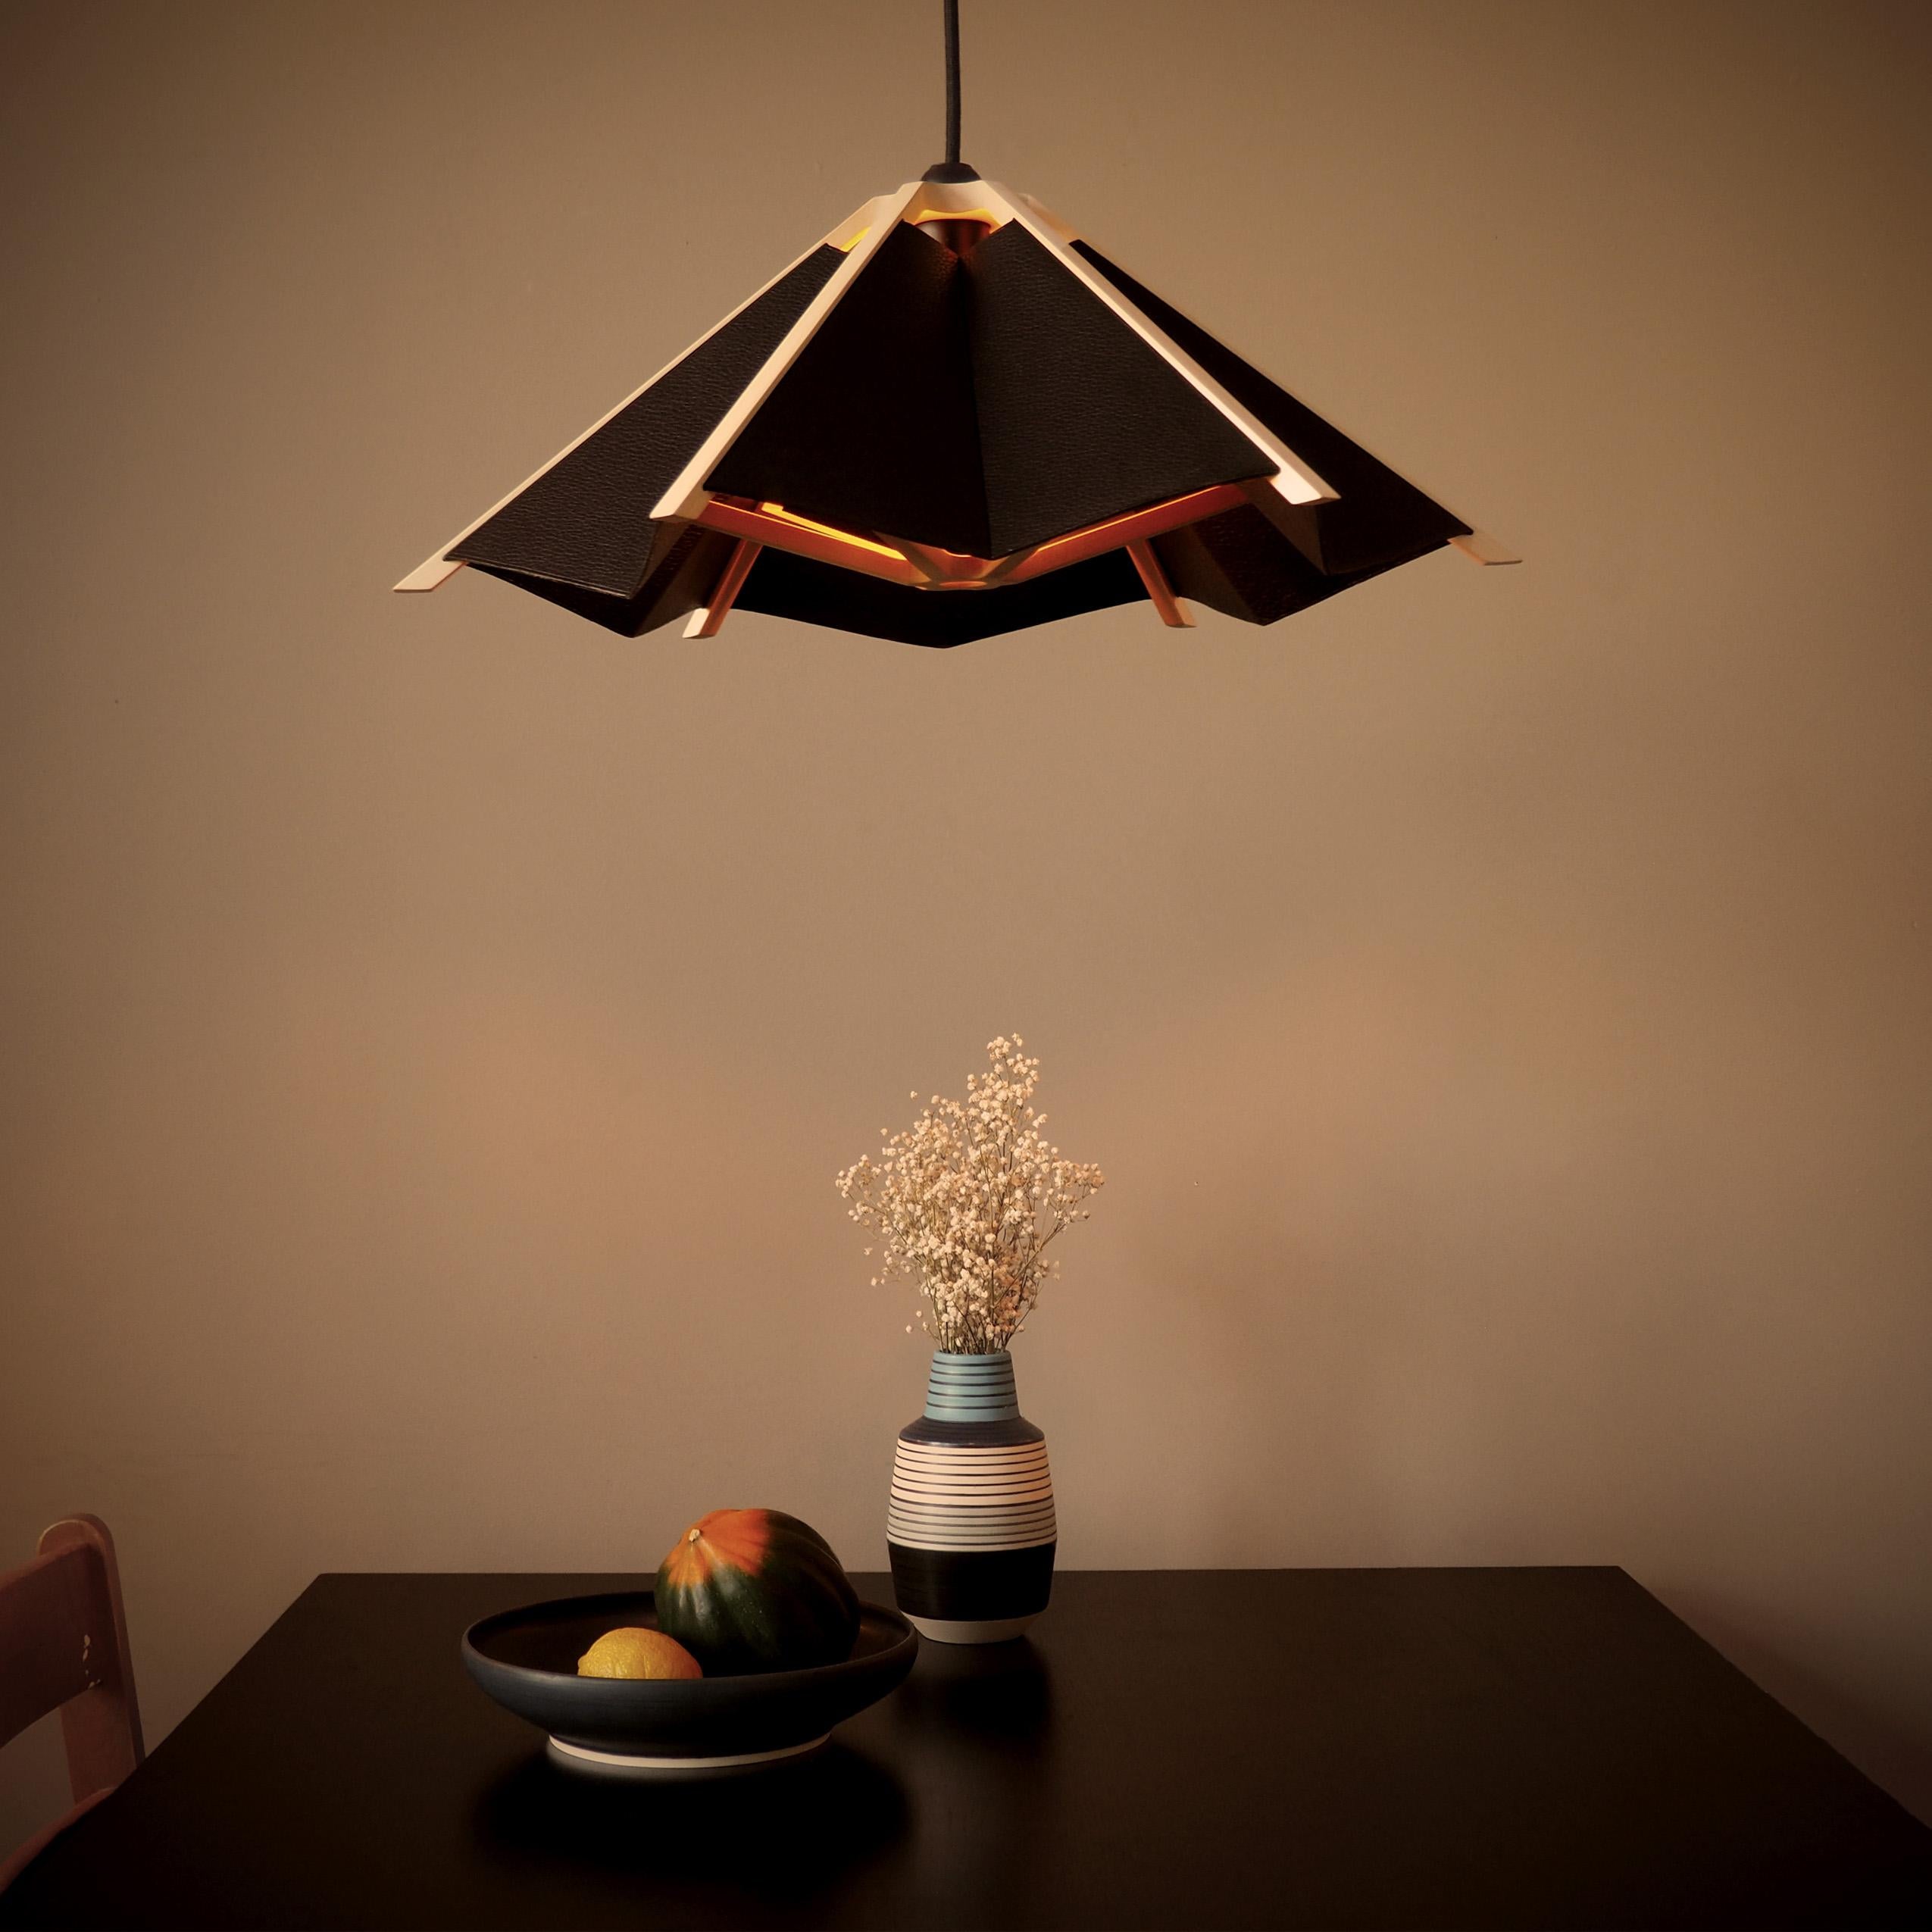 The Hanging Garden Lampshade is inspired by small paper umbrellas. 
A familiar object from our childhood, rethought as a hanging lamp. 
This lampshade has a very light wooden structure with different leather facets to create a textural contrast with